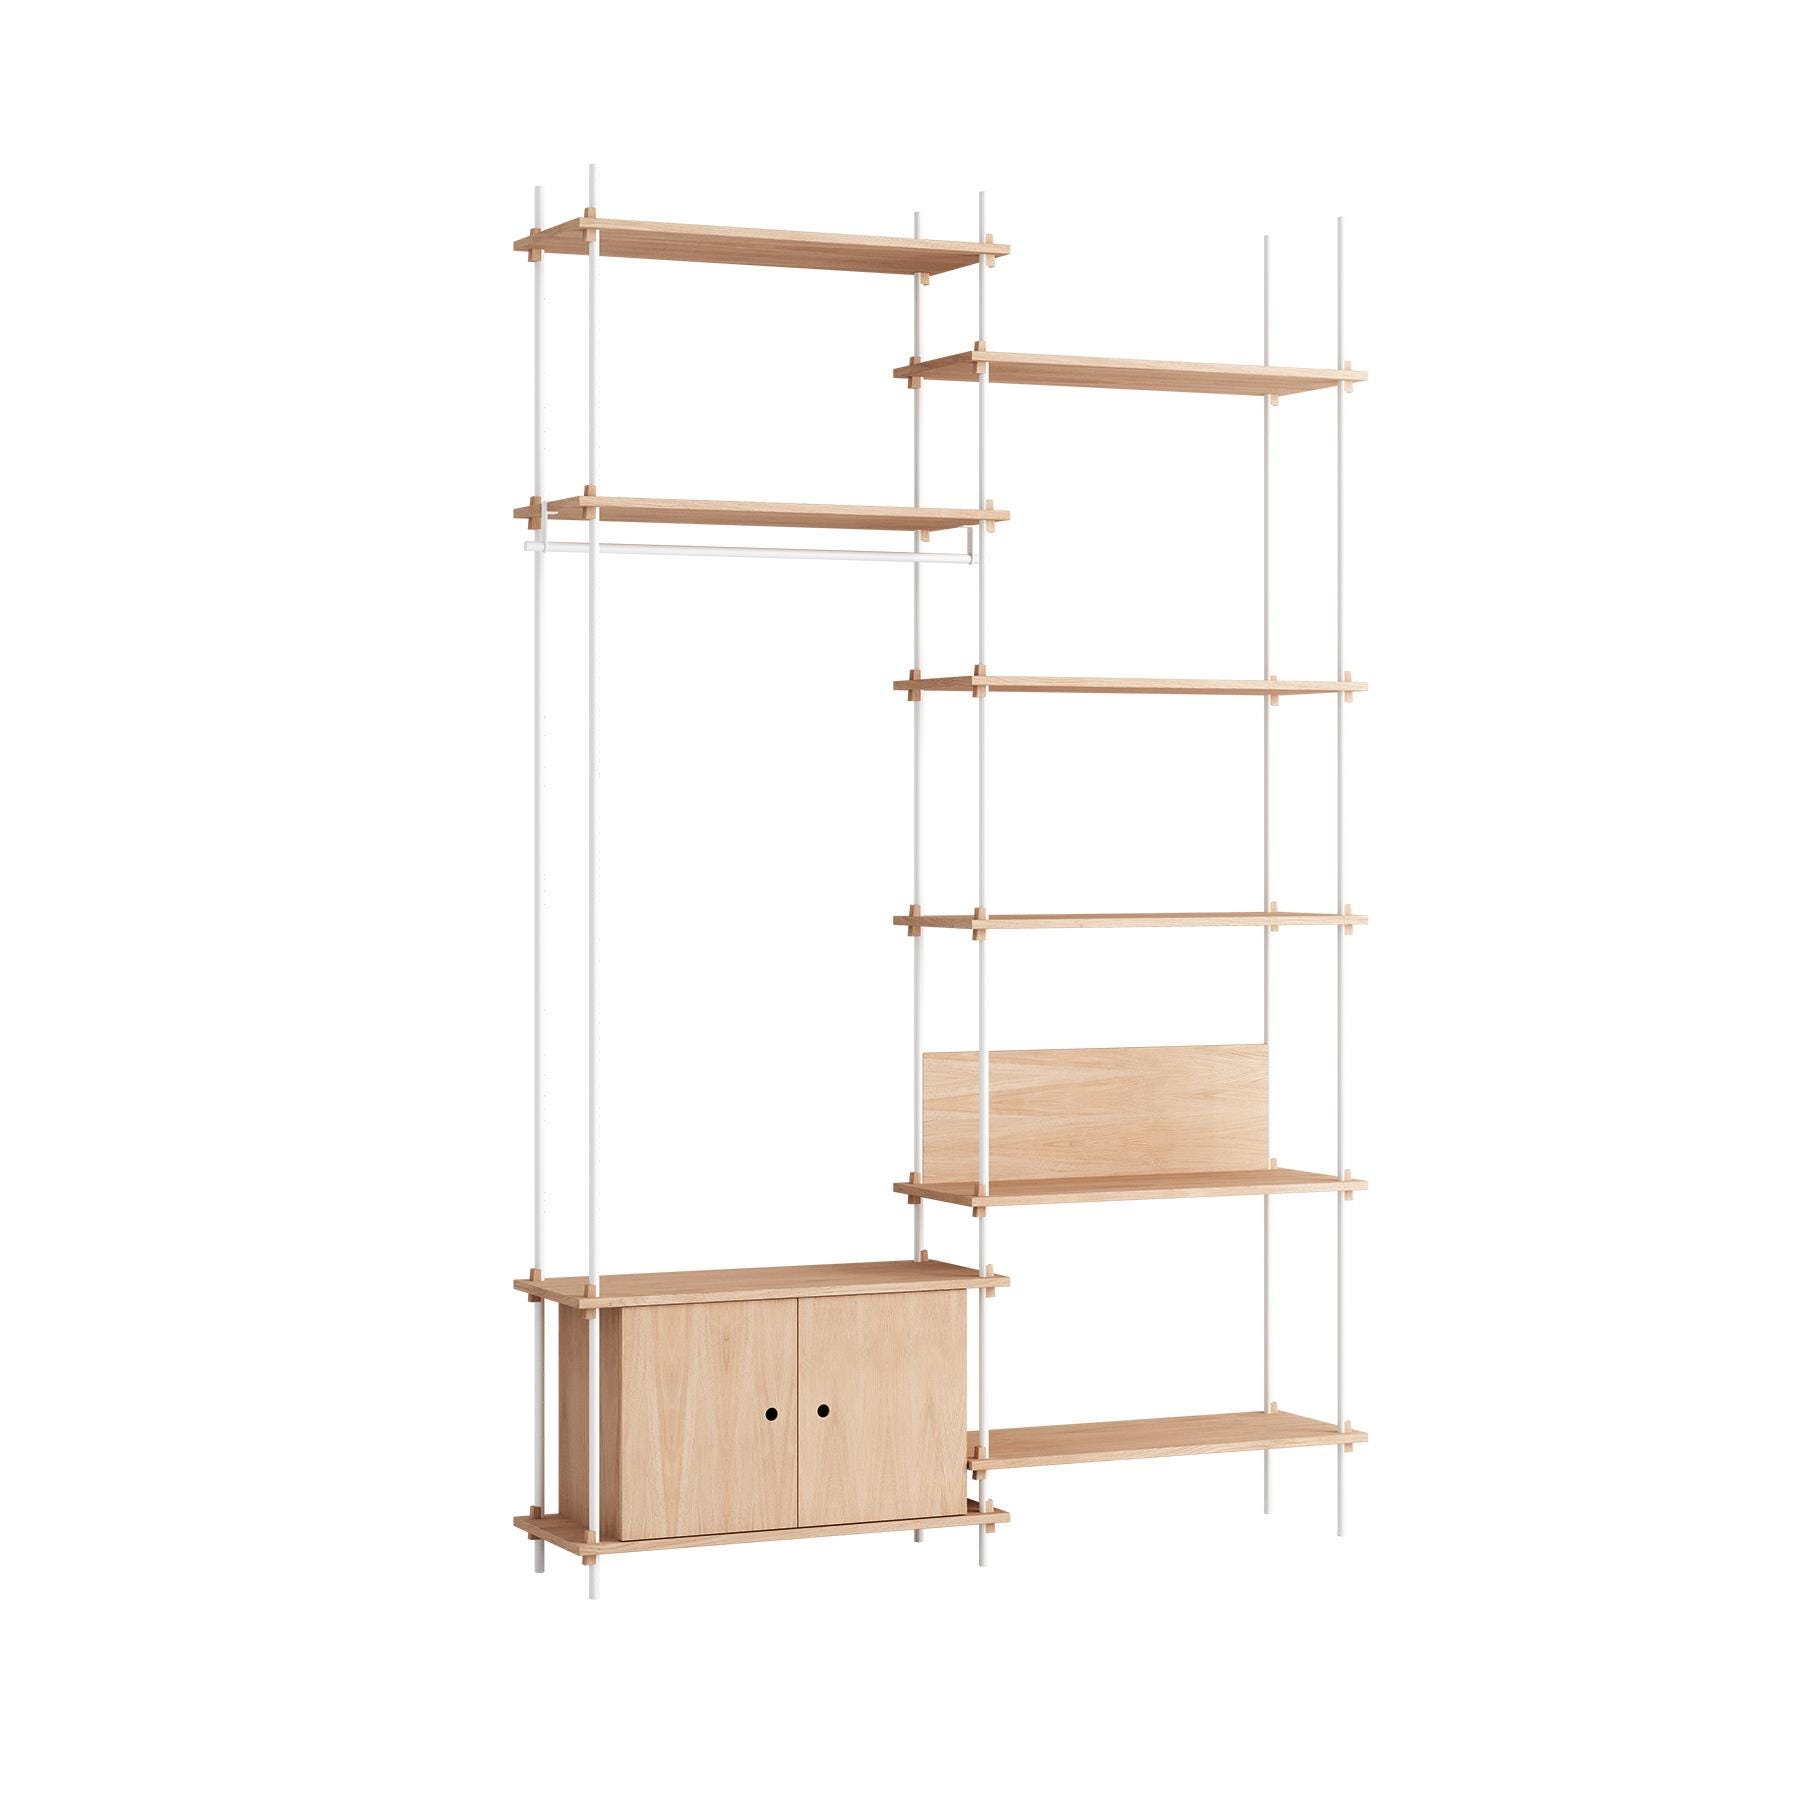 Moebe Double Shelving System 1 Cabinet Desk And Clothes Rail Oak White Light Wood Designer Furniture From Holloways Of Ludlow